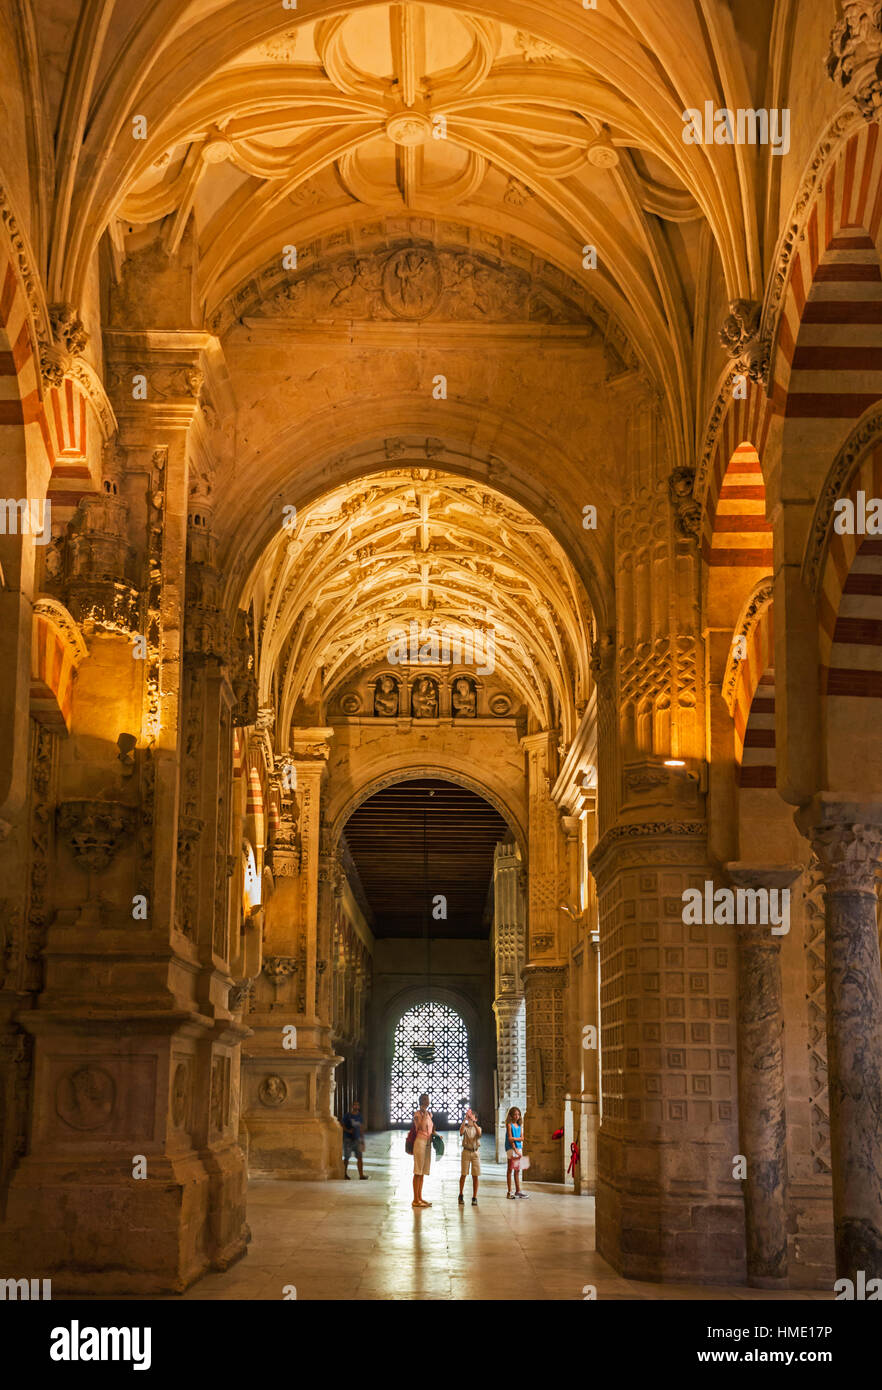 Cordoba, Cordoba Province, Andalusia, Spain.  Interior of La Mezquita, the Great Mosque.  Also known as the mosque-cathedral.  The Historic Centre of  Stock Photo